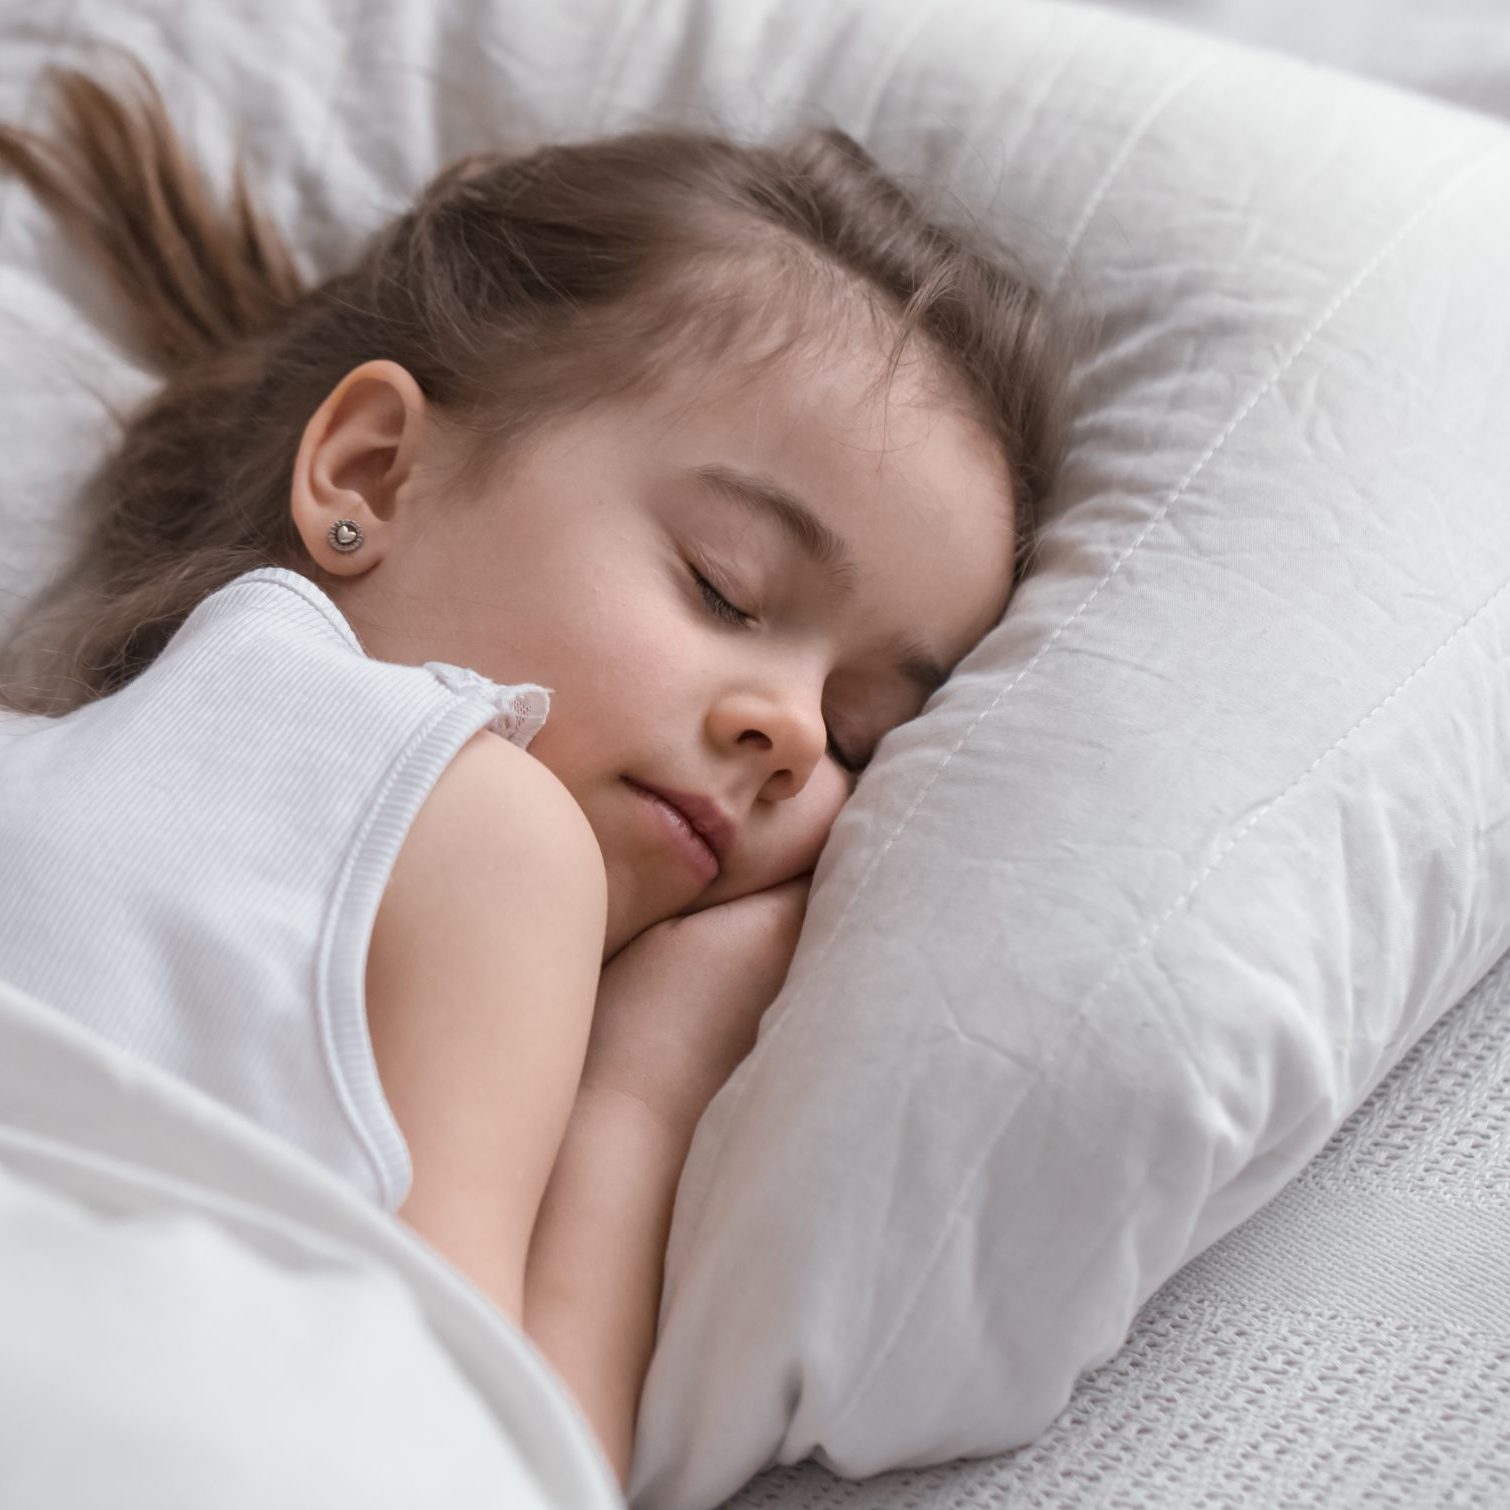 Cute little girl sleeps sweetly in a white cozy bed, the concept of children's rest and sleep